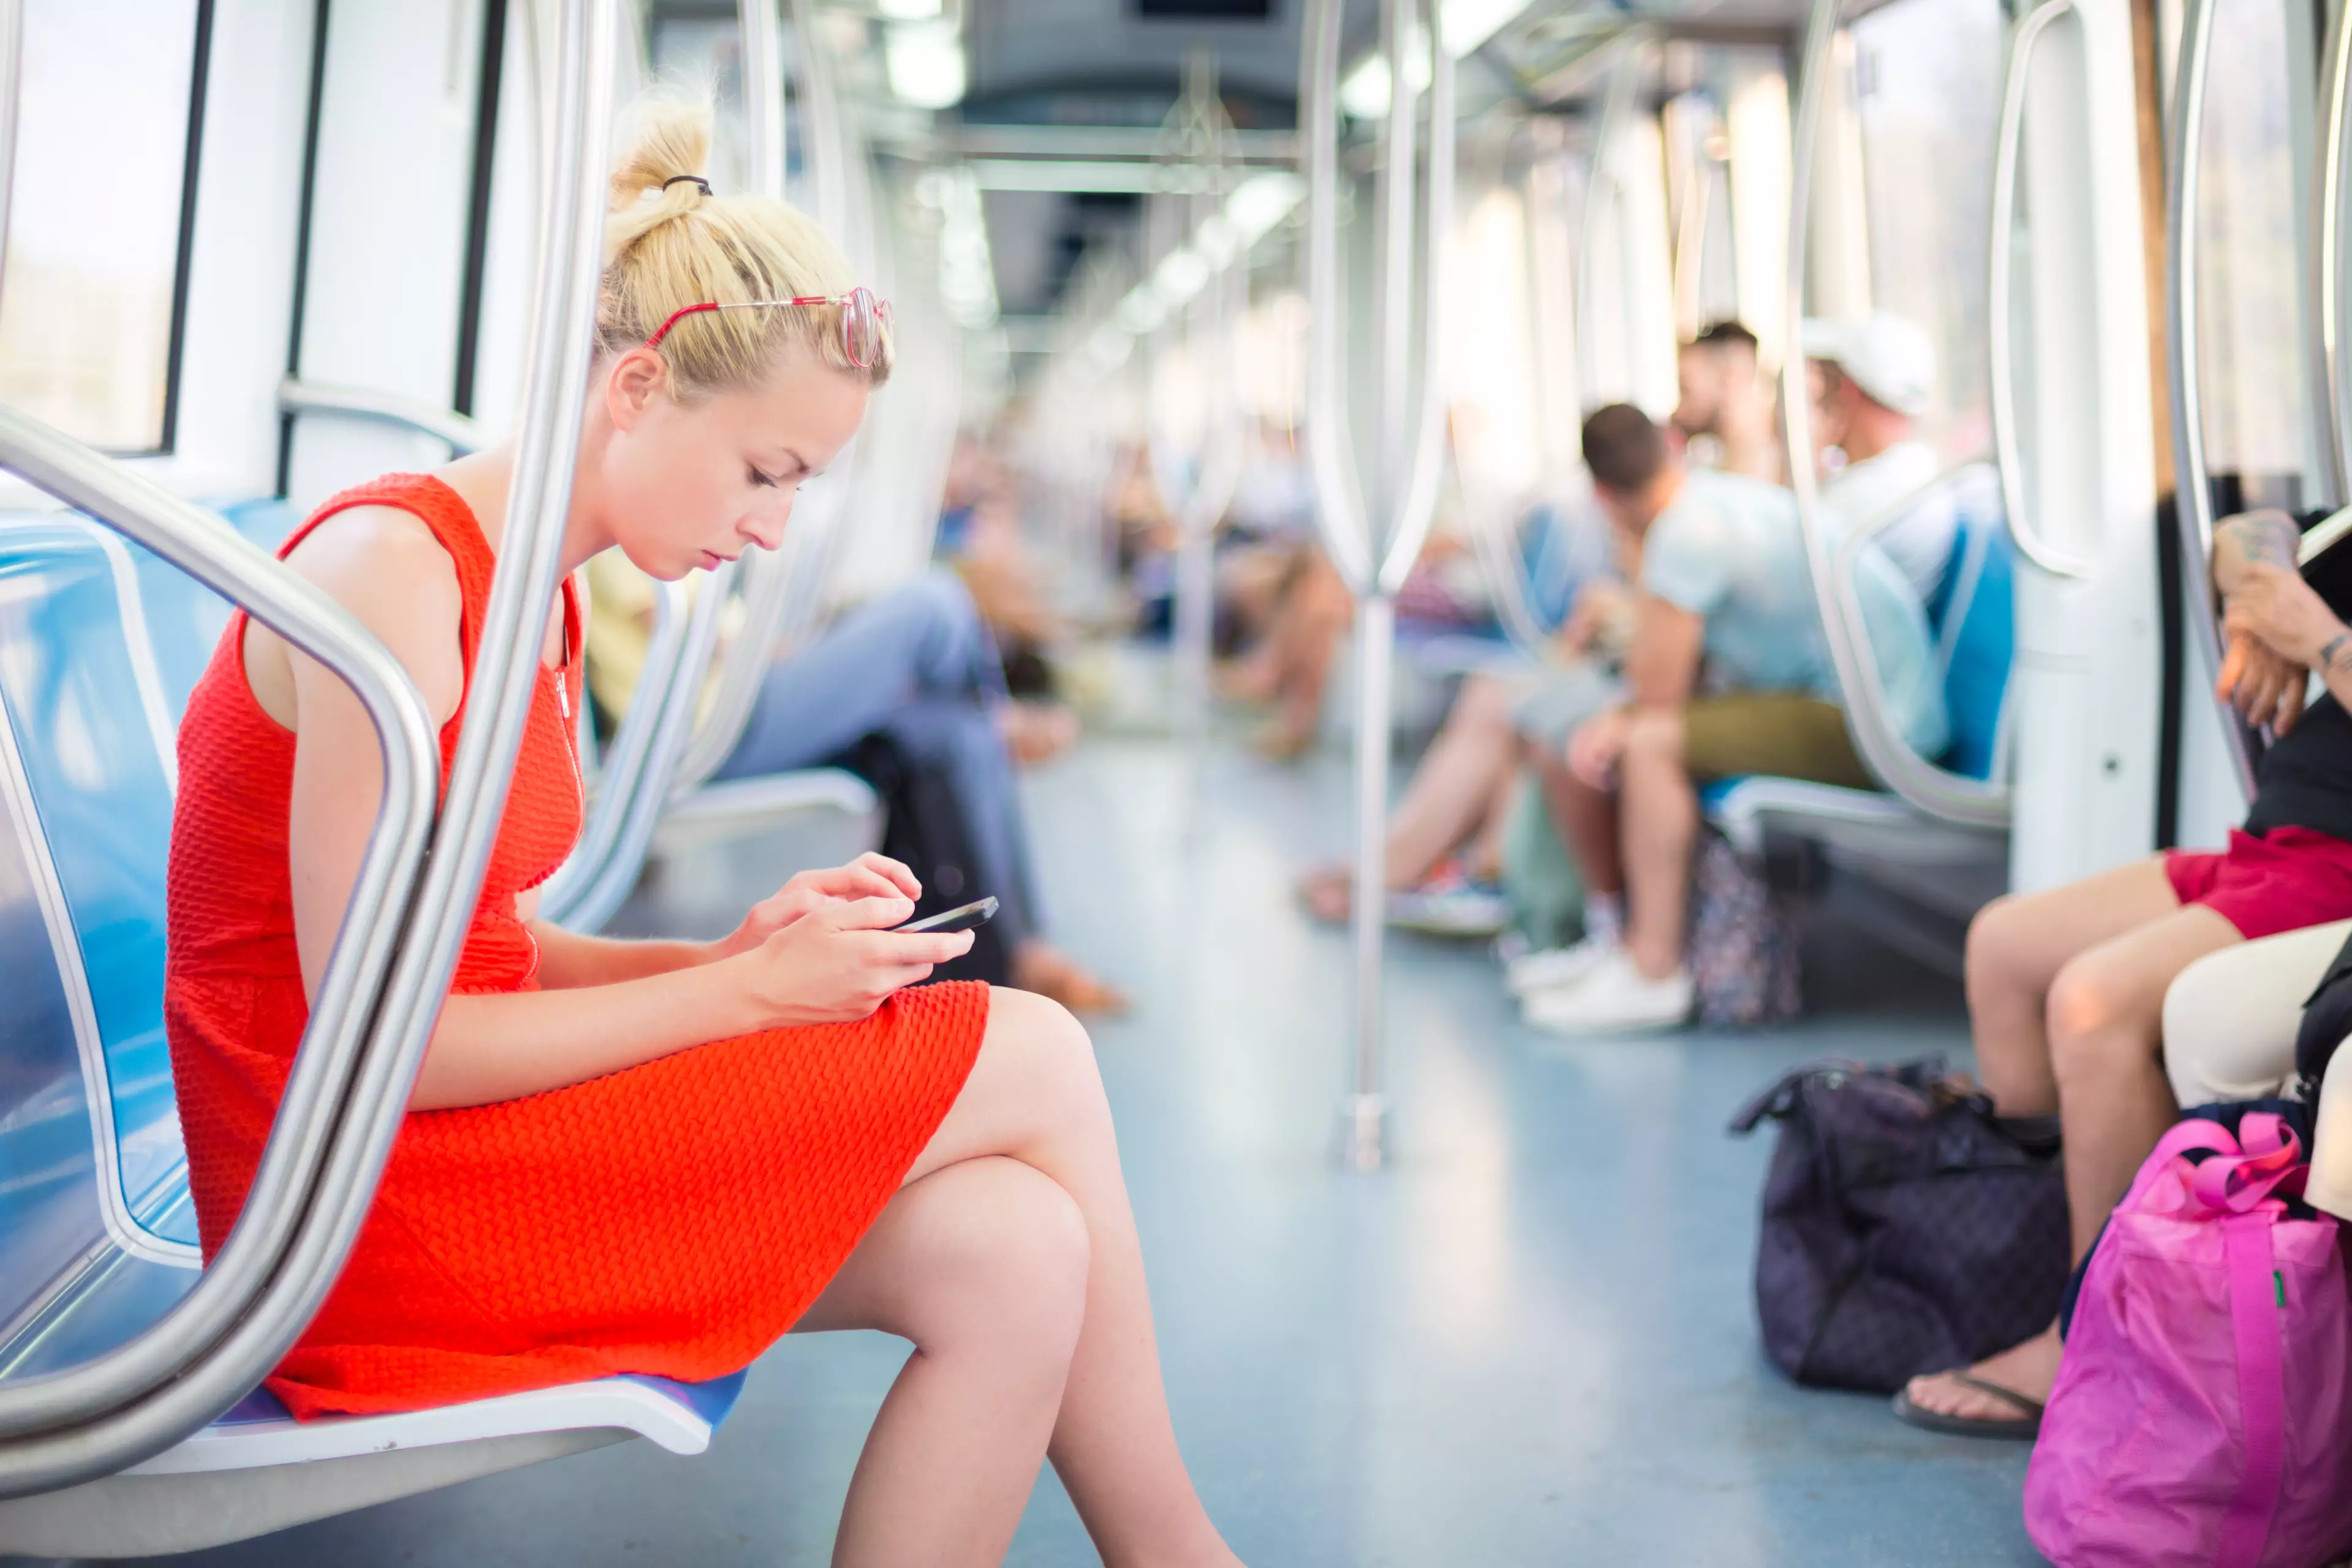 You can text 61016 if you experience or witness sexual harassment on public transport (